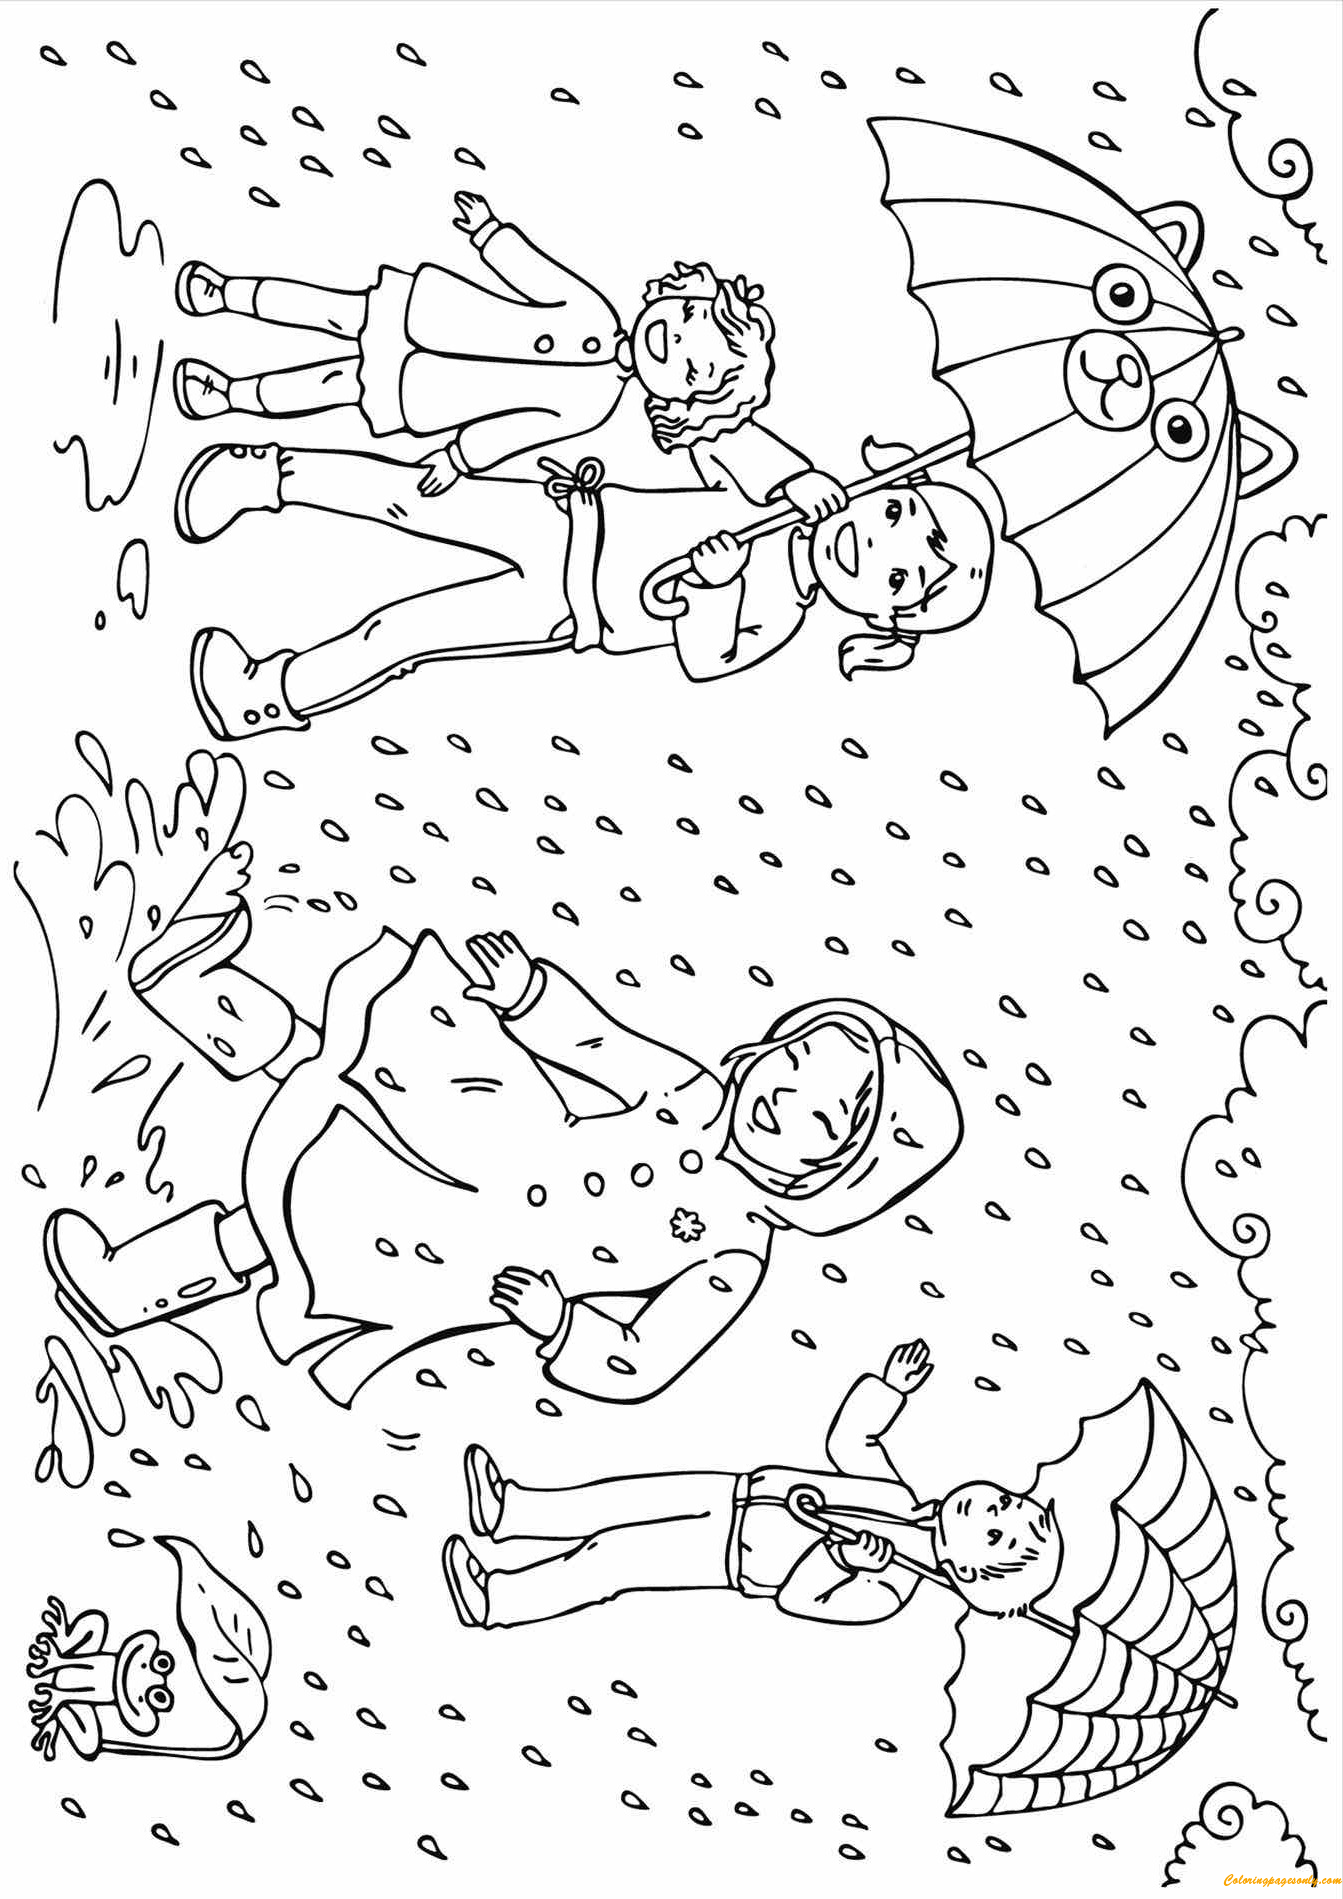 Kids Enjoying Spring Showers Coloring Pages